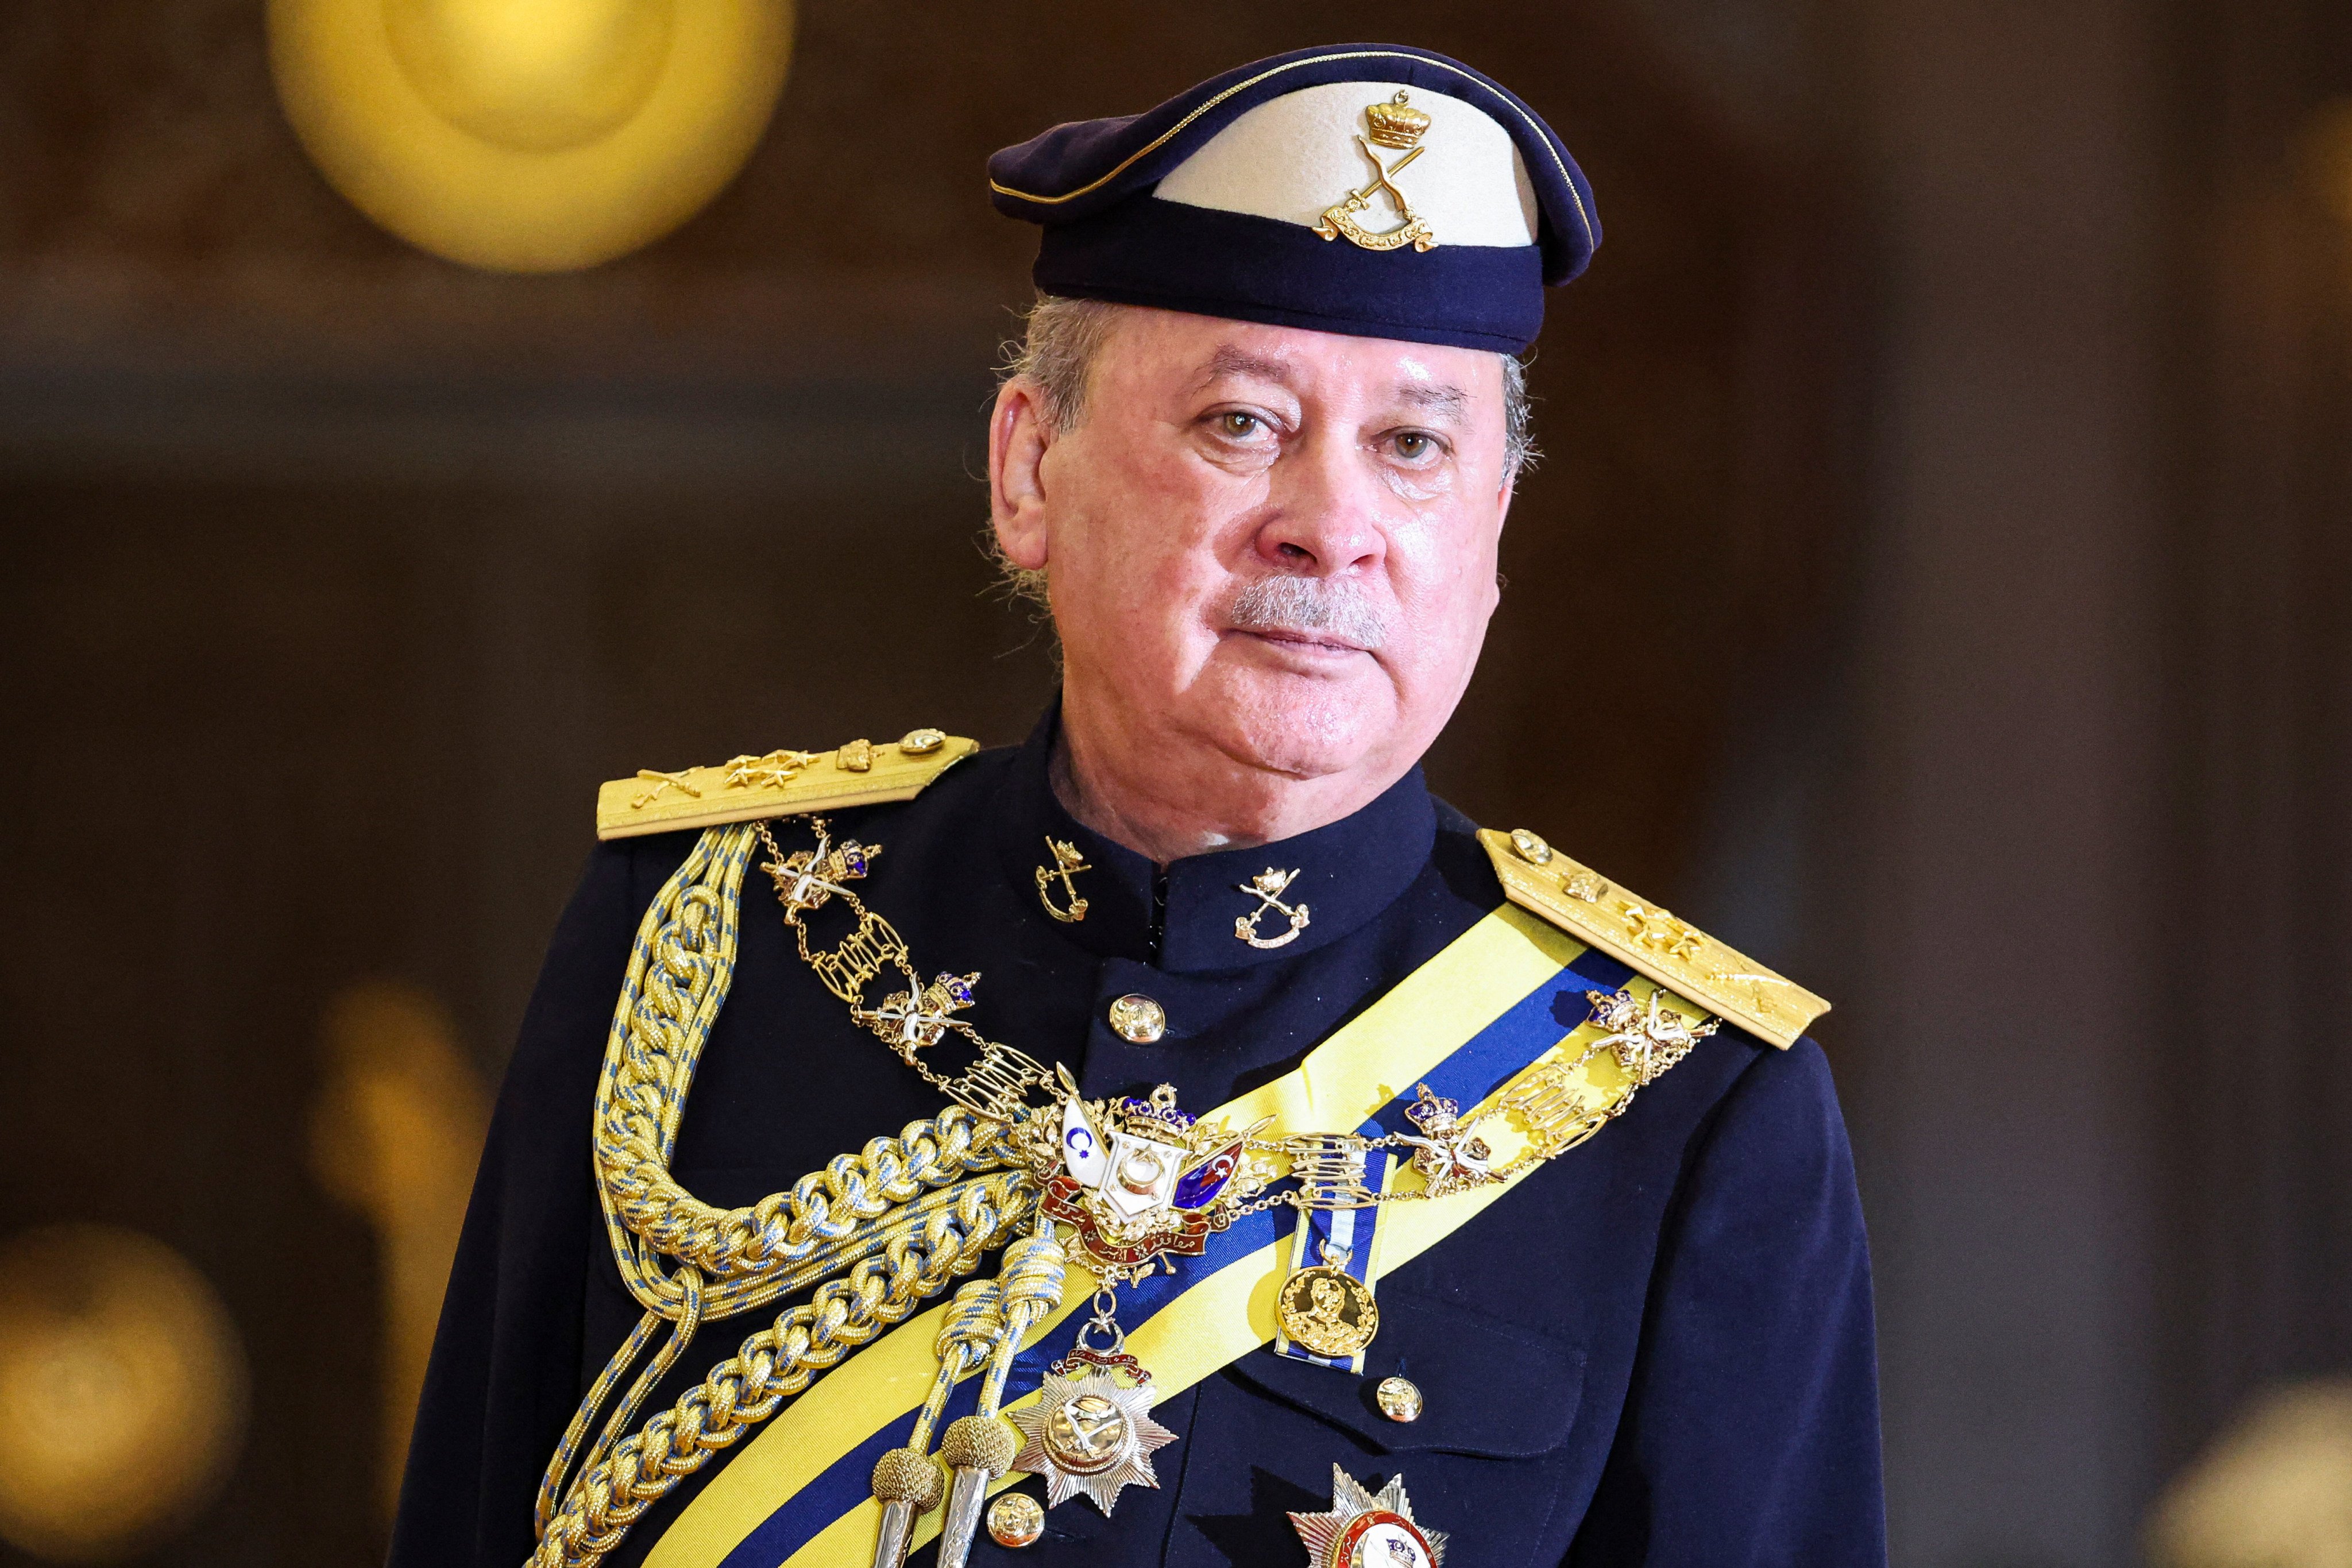 King of Malaysia Sultan Ibrahim Iskandar asked political leaders to refrain giving “extreme views”, before the holidays amid a row about socks with the word “Allah”.  Photo: AFP/Pool